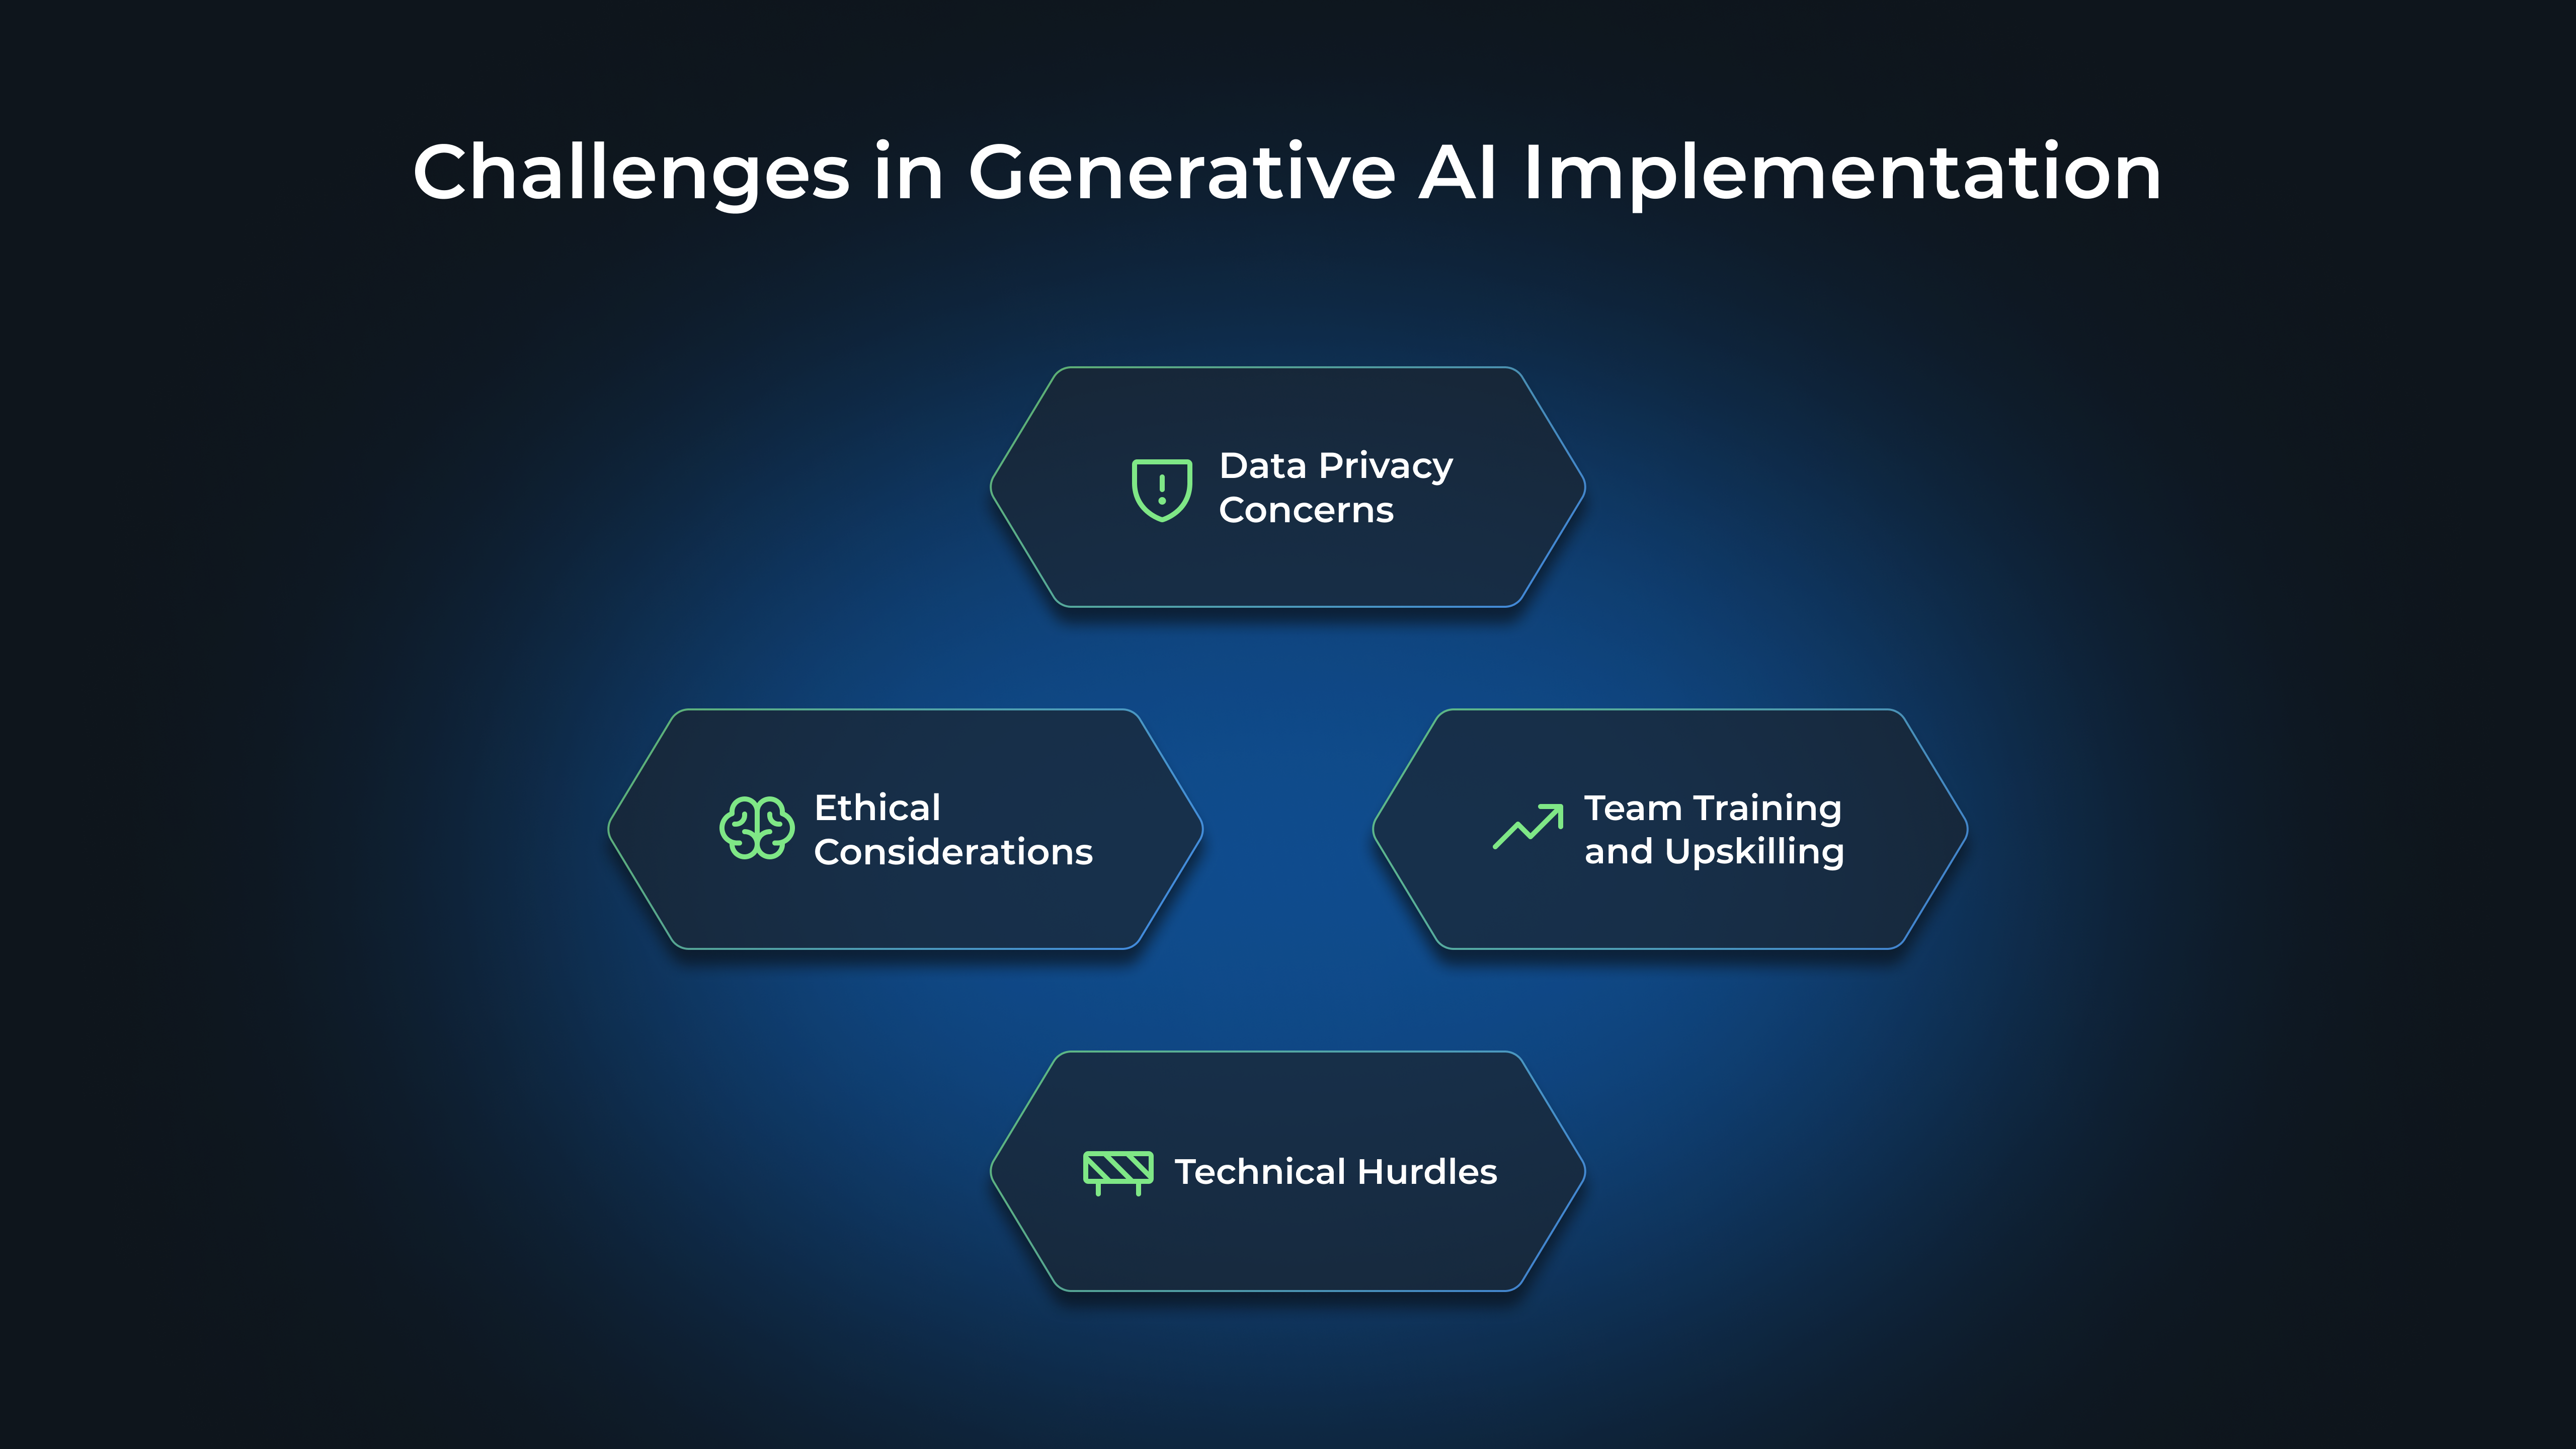 Challenges in Generative AI Implementation: Data Privacy Concerns, Ethical Considerations, Team Training and Upskilling, Technical Hurdles
